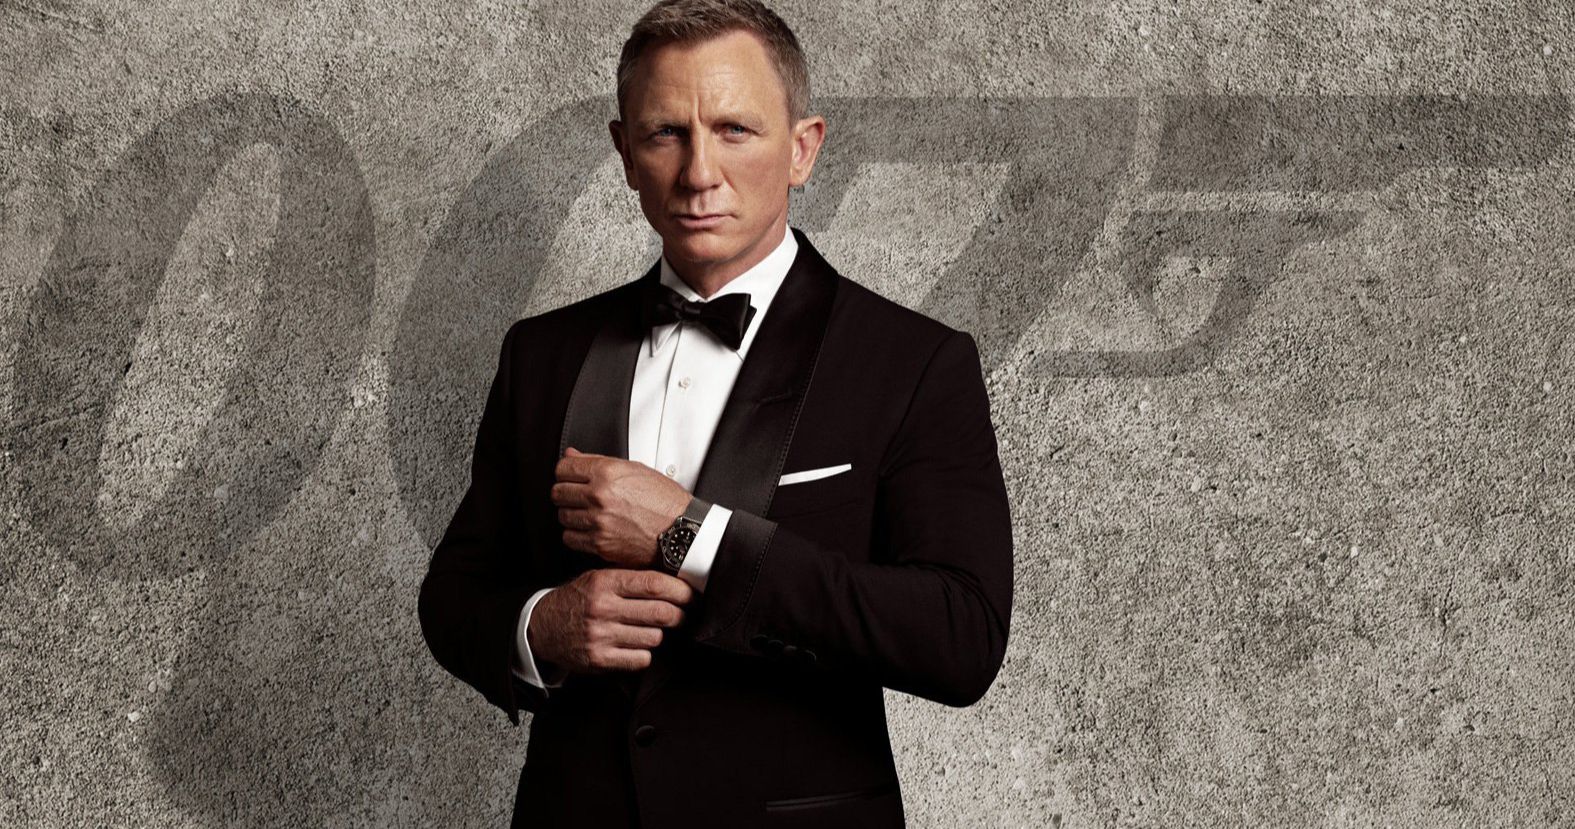 James Bond Writer Is Worried Amazon Will Turn 007 Into an MCU-Style Franchise